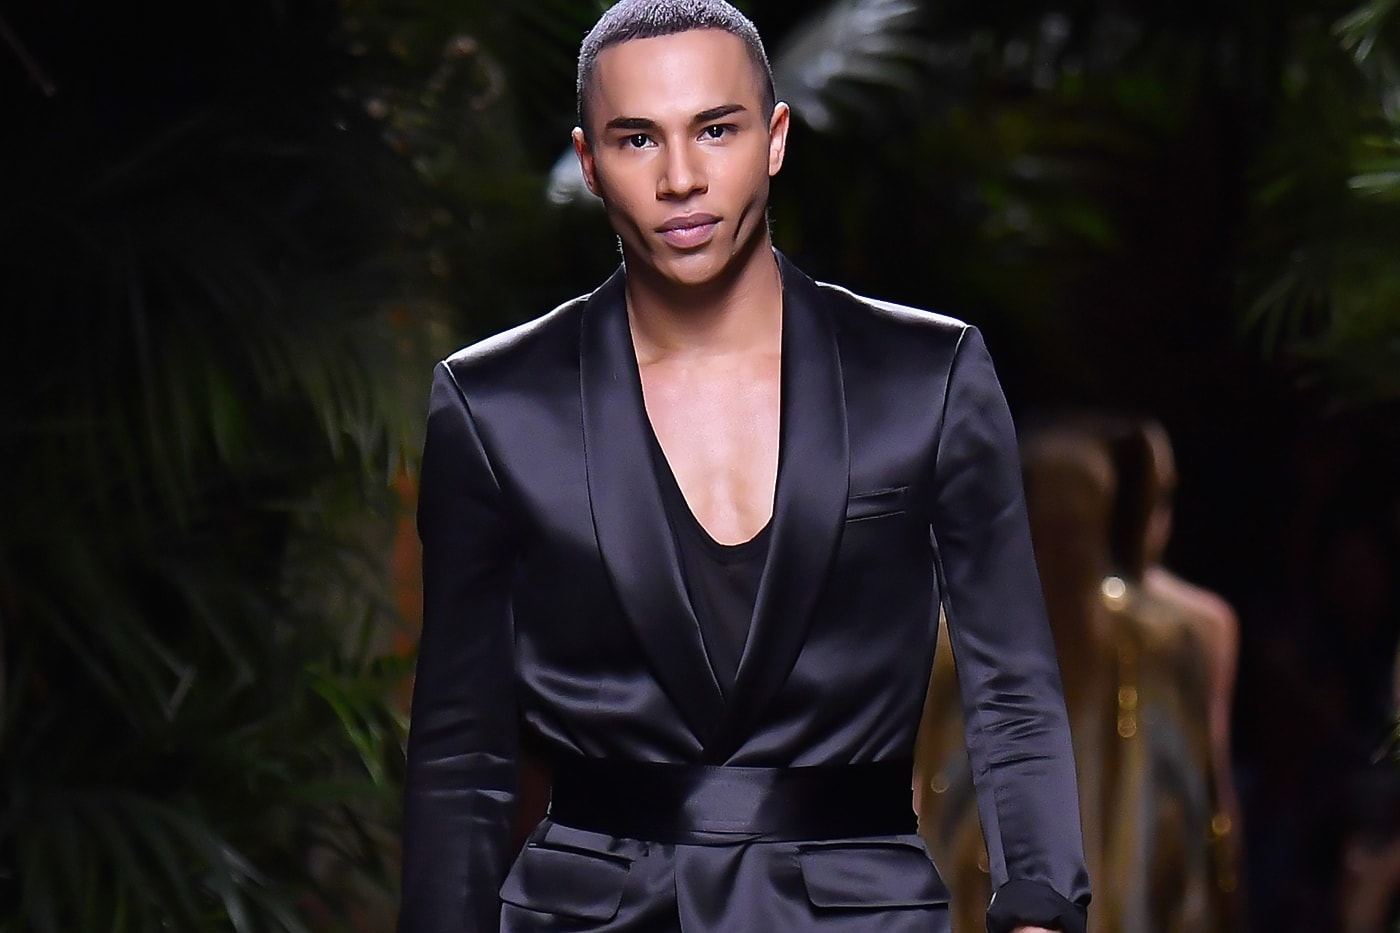 Balmain: NFTs Are ‘Powerful Tools’ All Brands Should Use